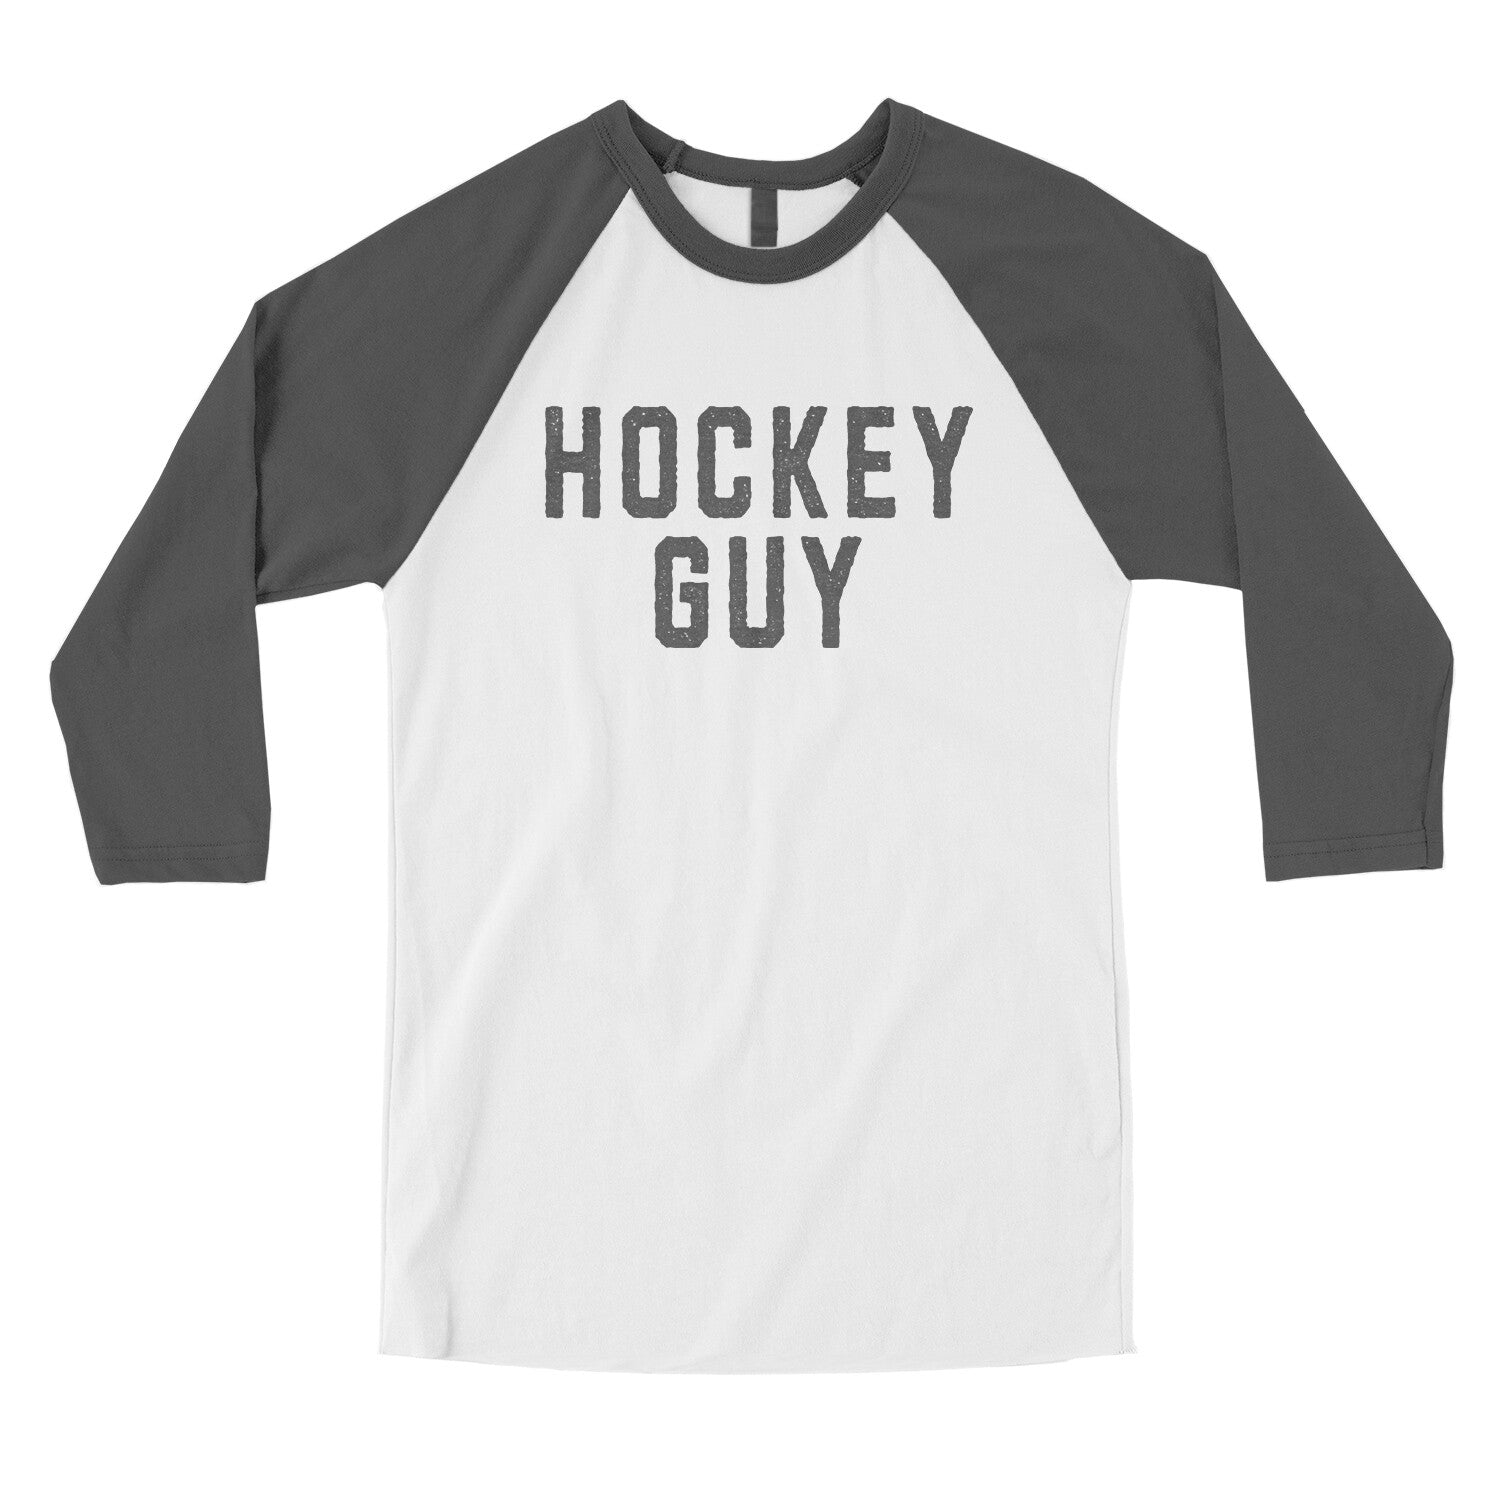 Hockey Guy in White with Asphalt Color